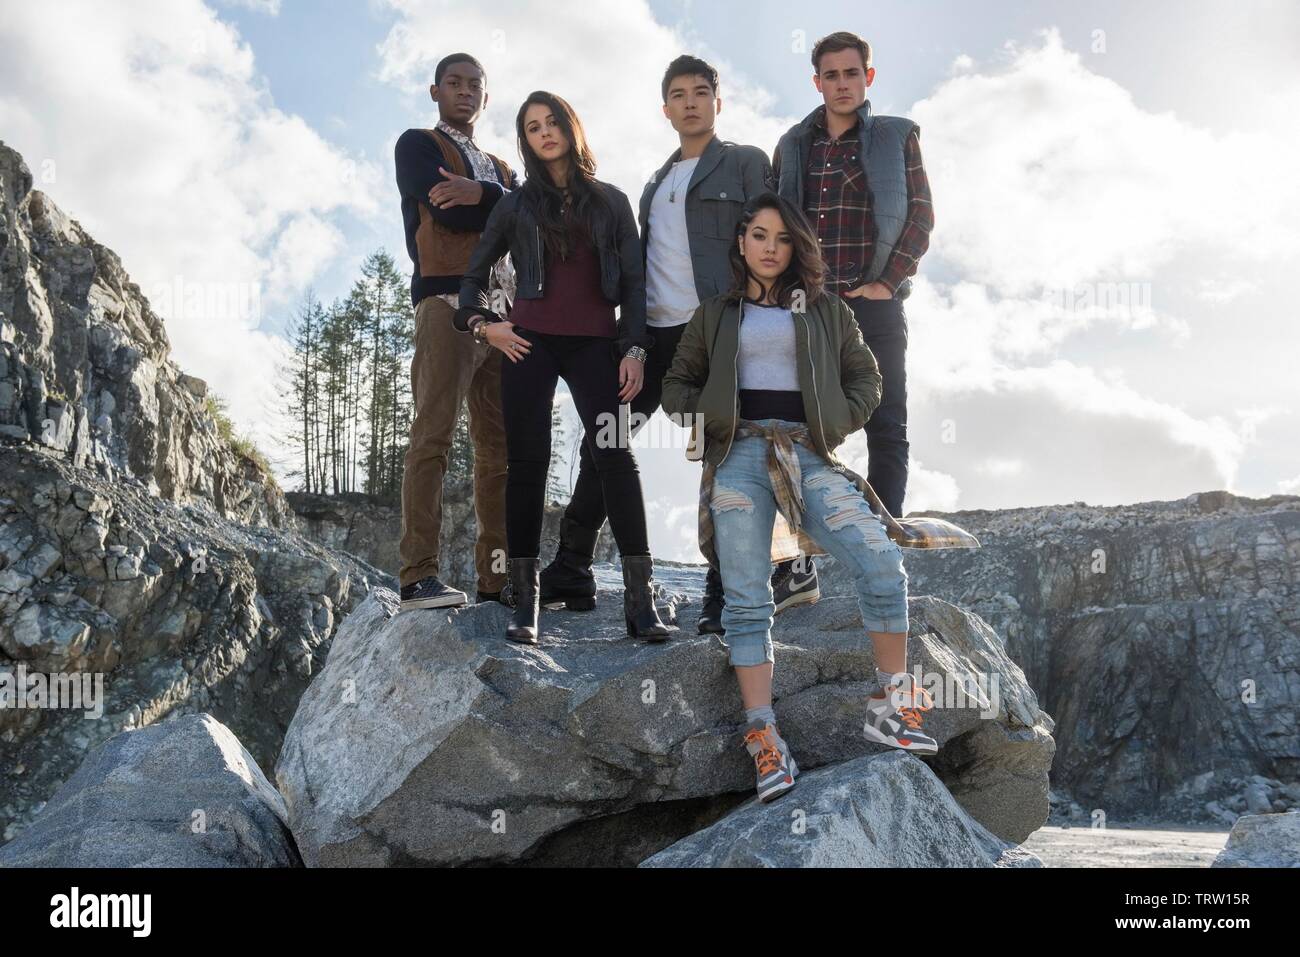 RJ CYLER , NAOMI SCOTT , LUDI LIN , DACRE MONTGOMERY and BECKY G in POWER RANGERS (2017). Copyright: Editorial use only. No merchandising or book covers. This is a publicly distributed handout. Access rights only, no license of copyright provided. Only to be reproduced in conjunction with promotion of this film. Credit: LIONSGATE/SABAN BRANDS/SABAN ENT/WALT DISNEY STUDIOS / Album Stock Photo